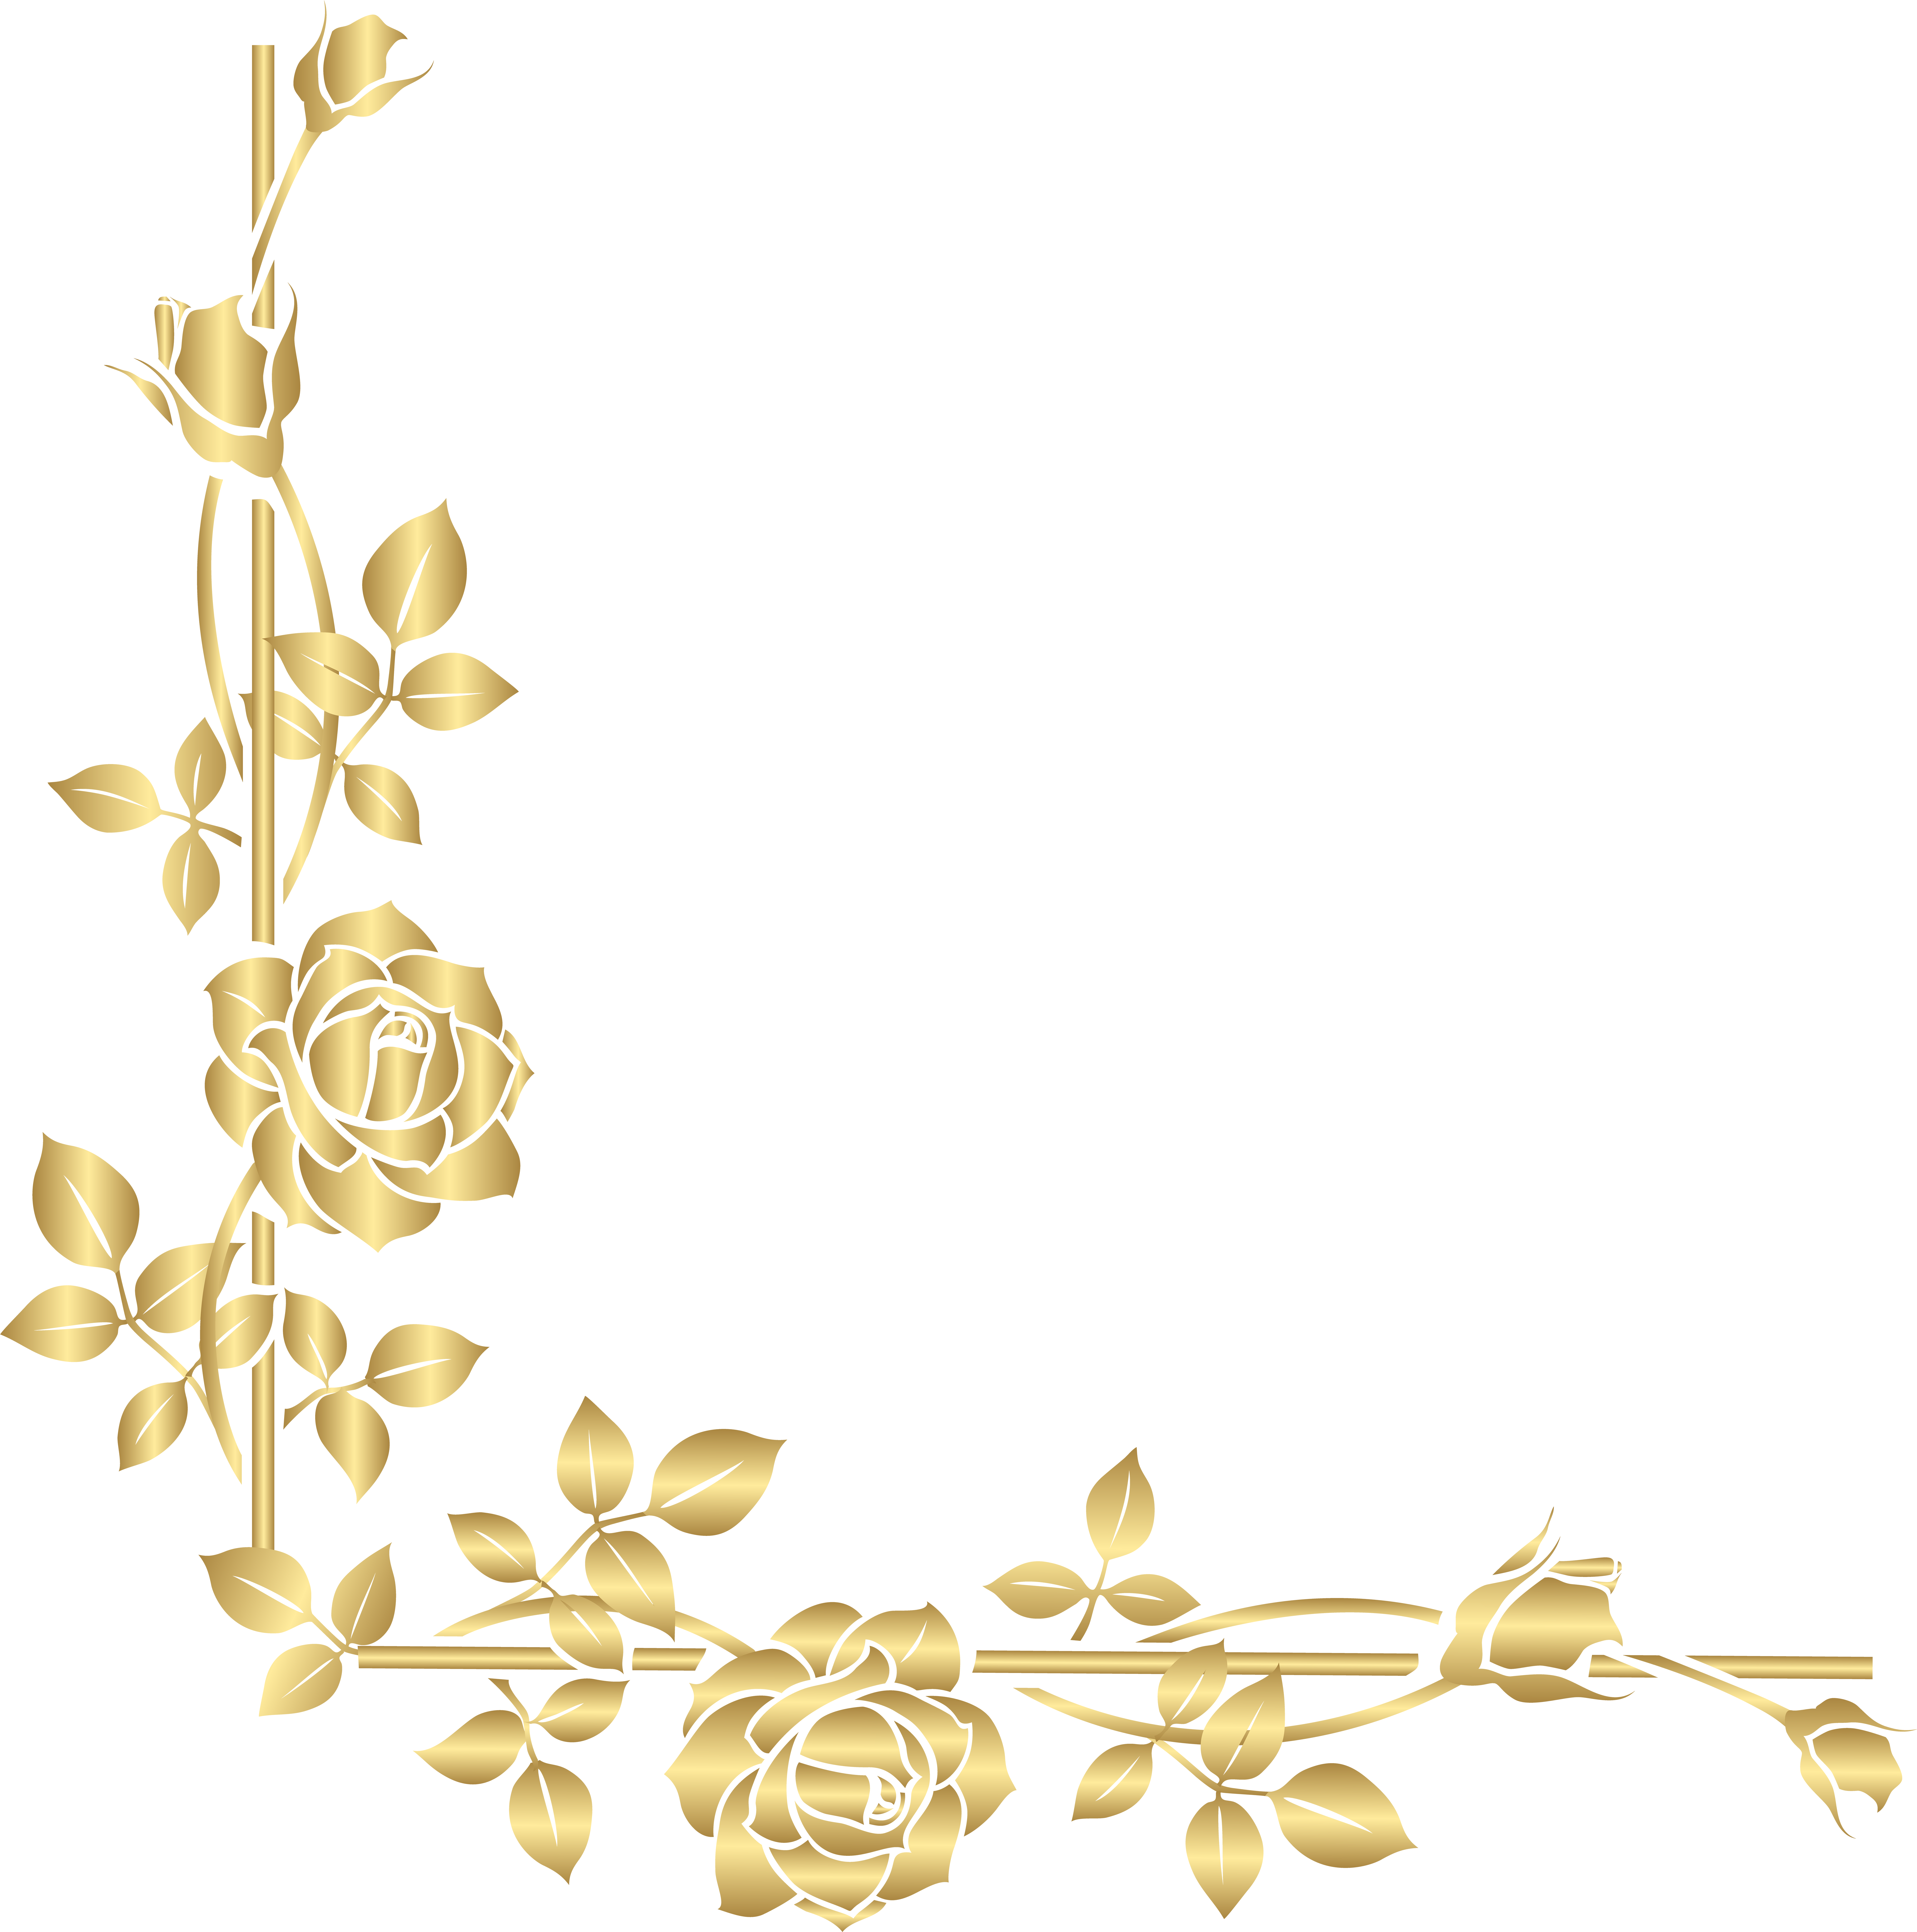 A Gold Roses And Leaves On A Black Background